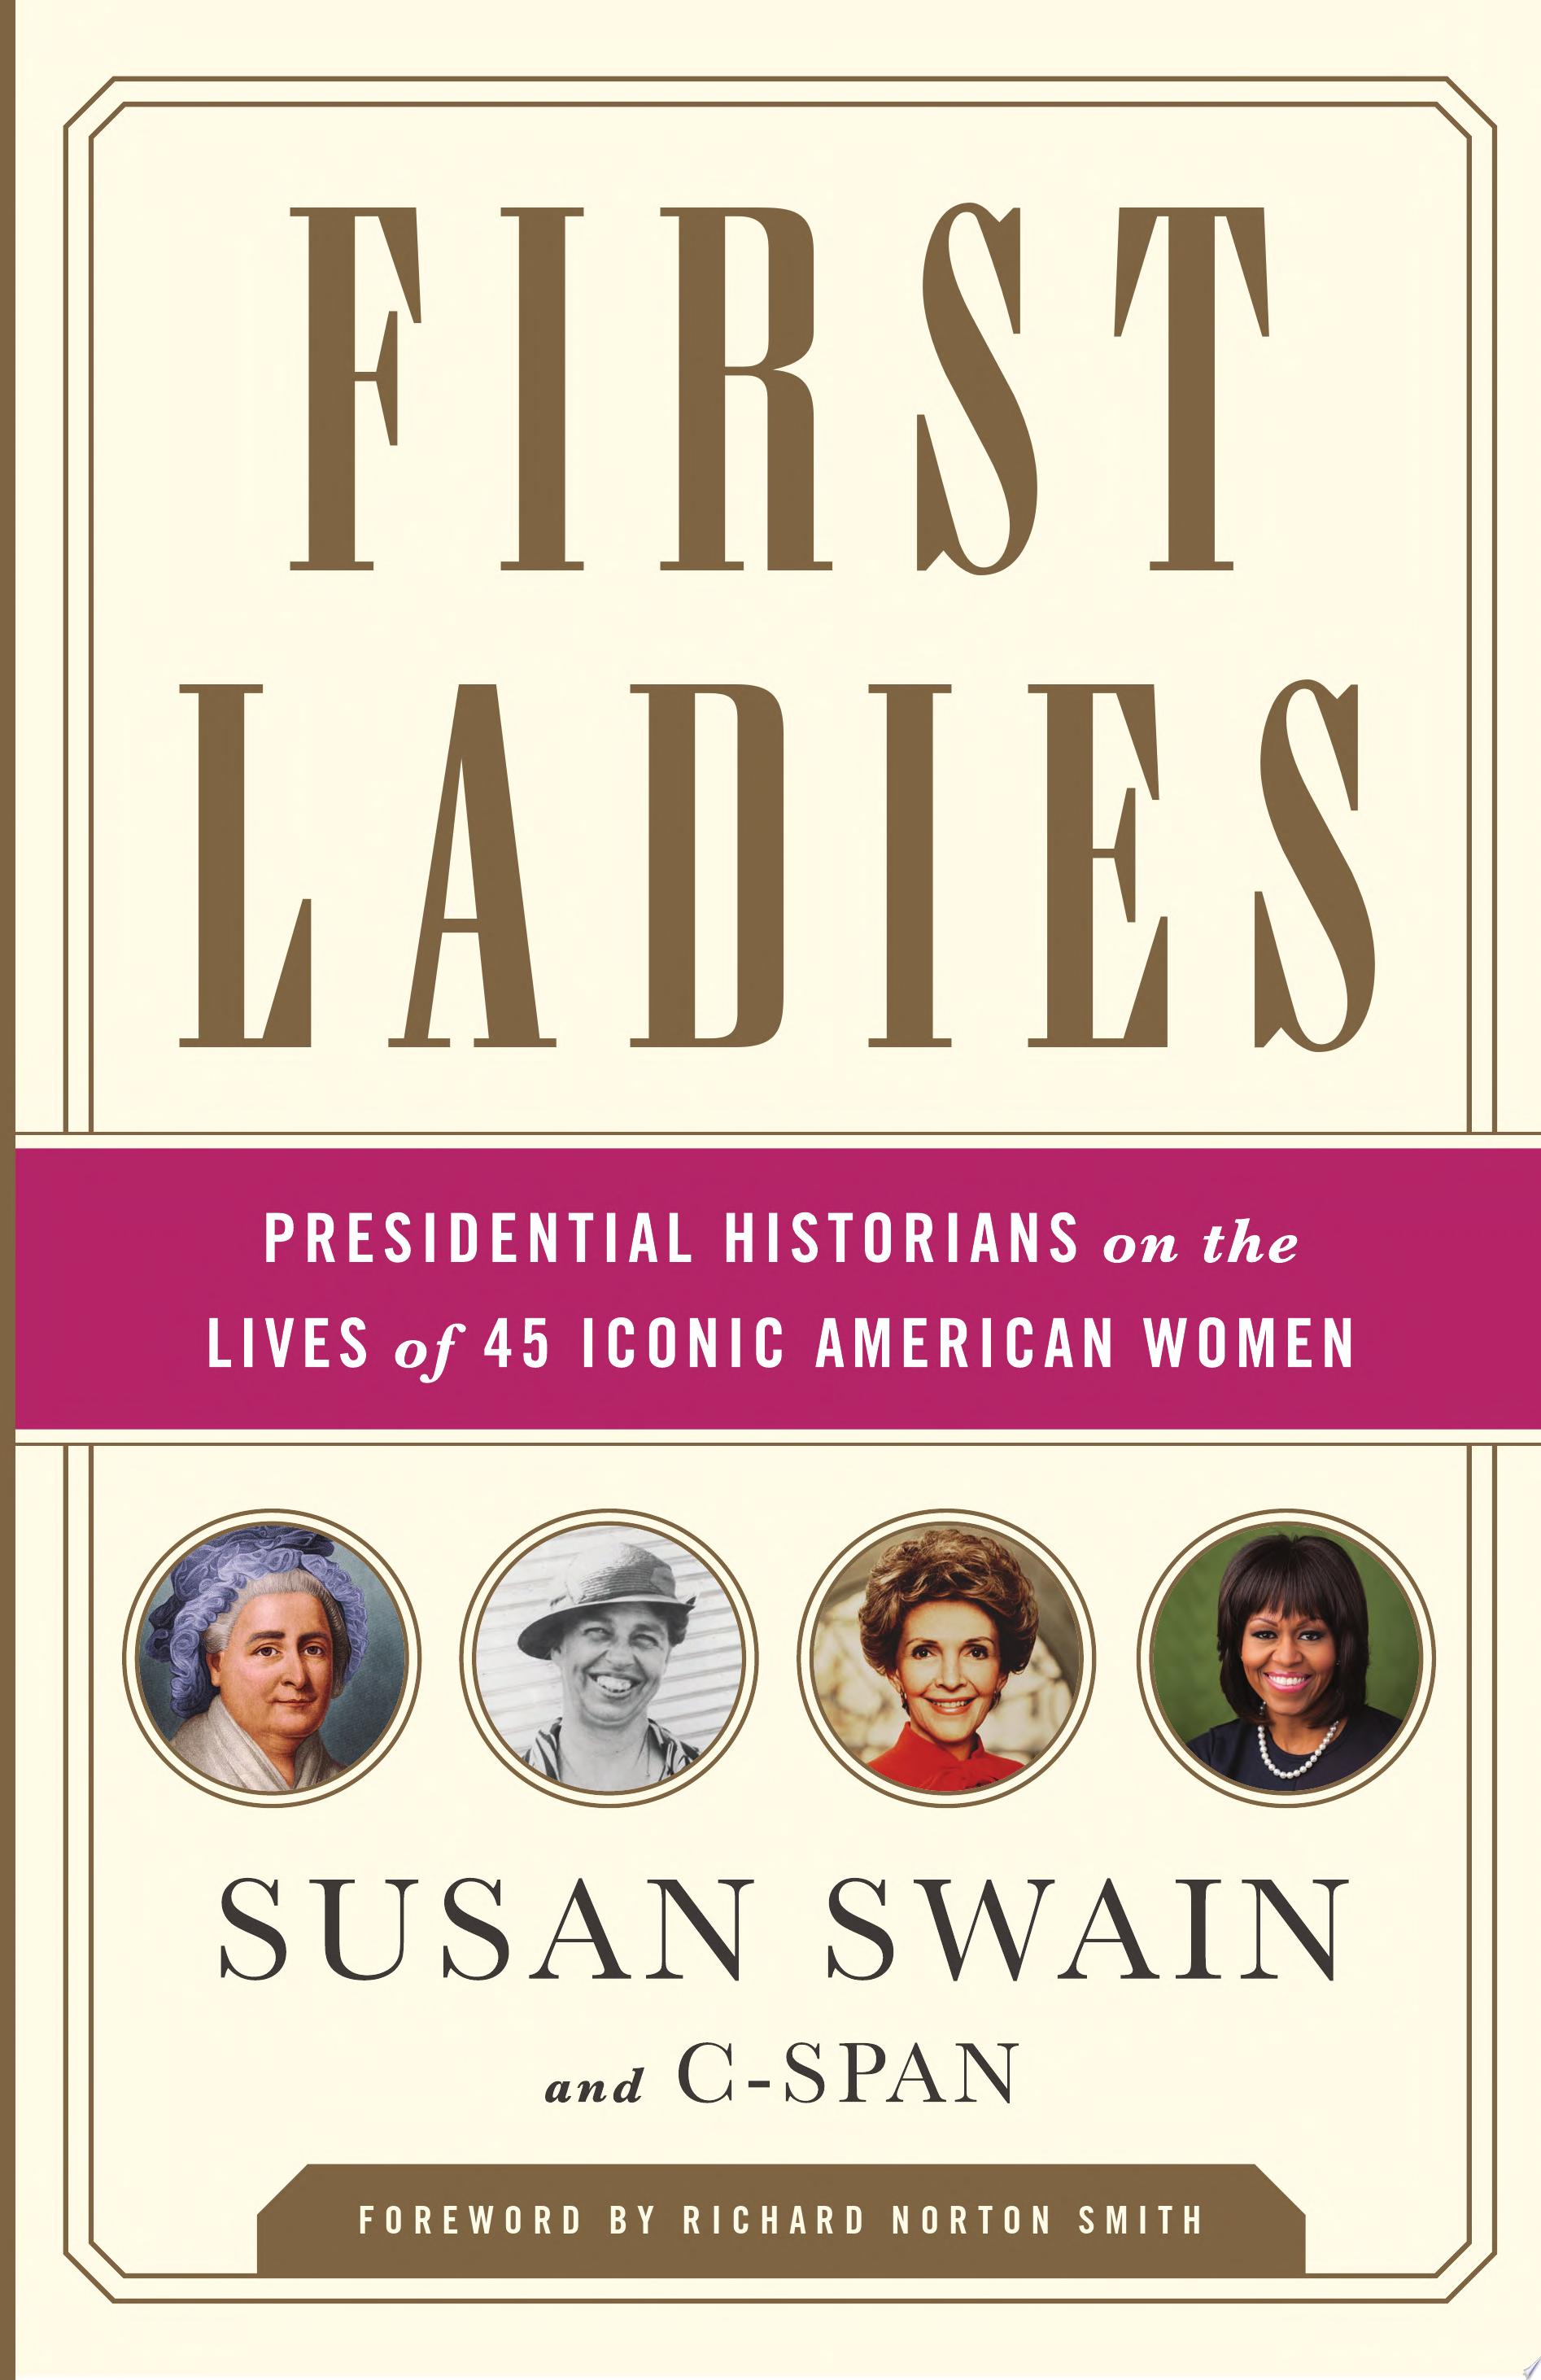 Image for "First Ladies"